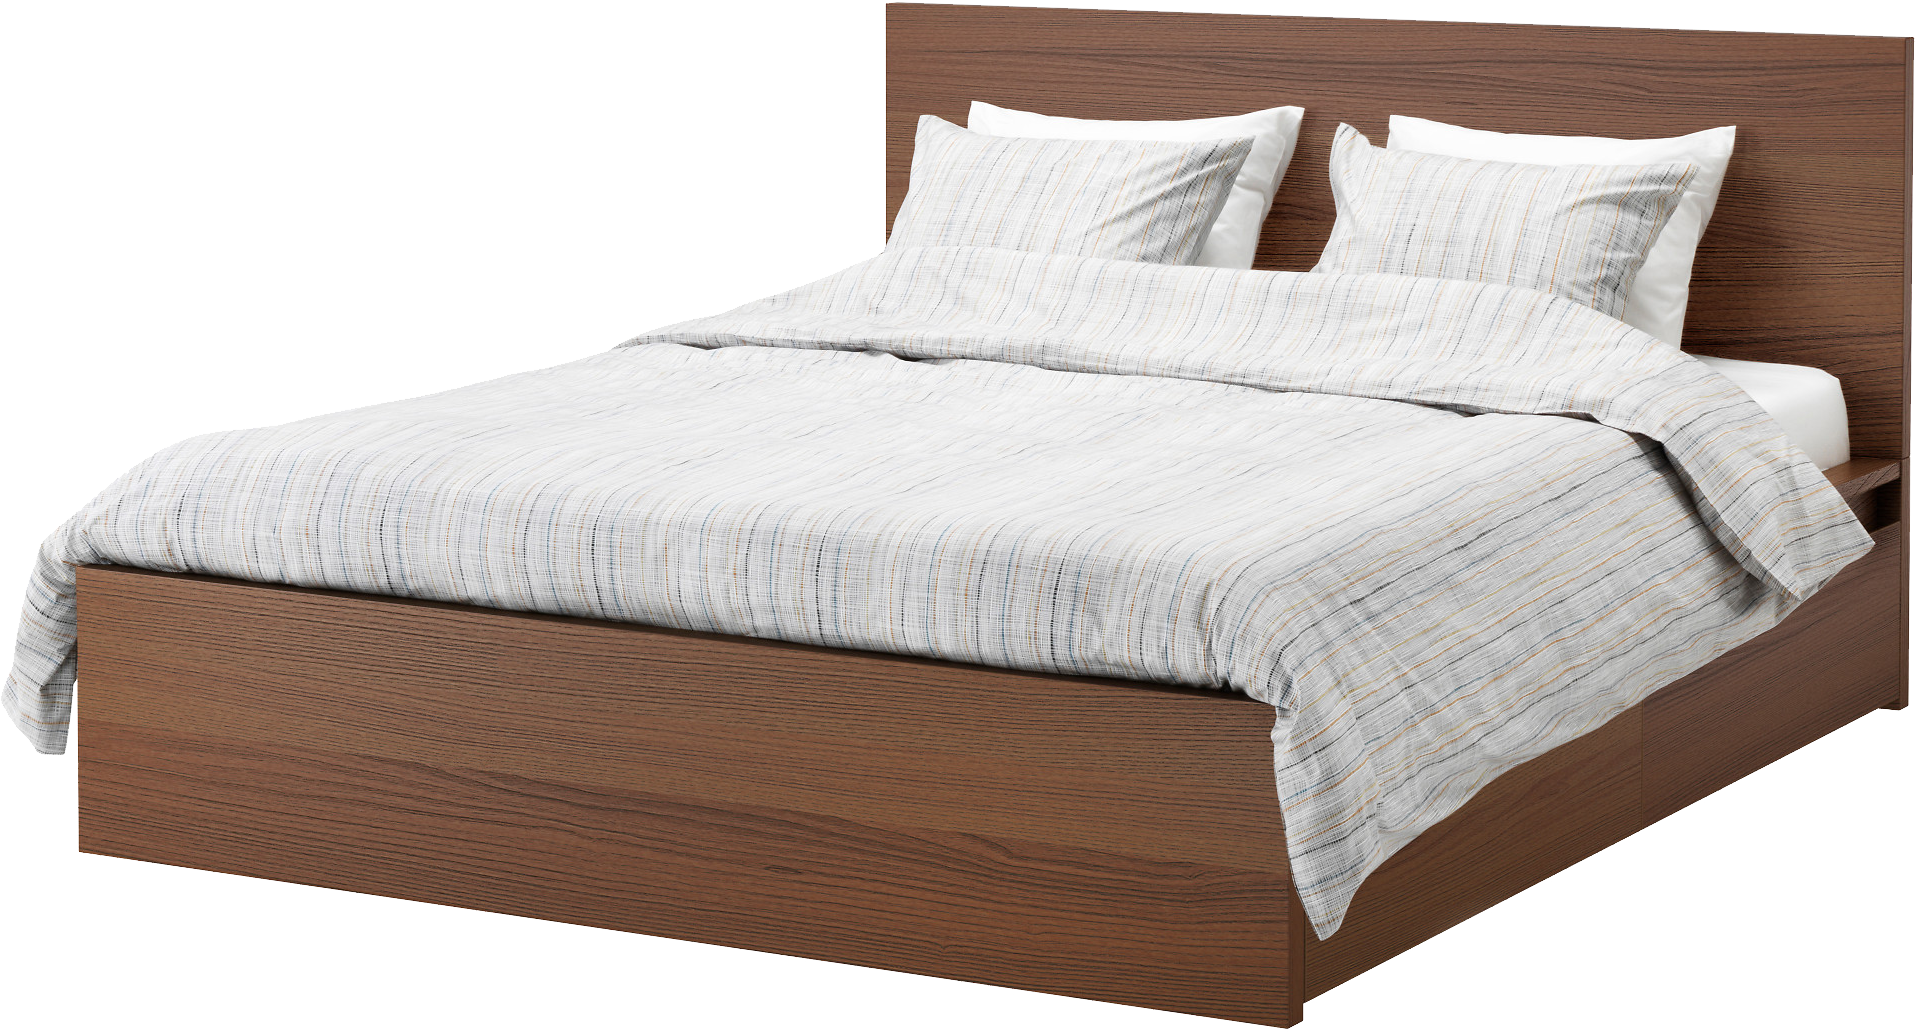 Bed PNG Transparant Beeld